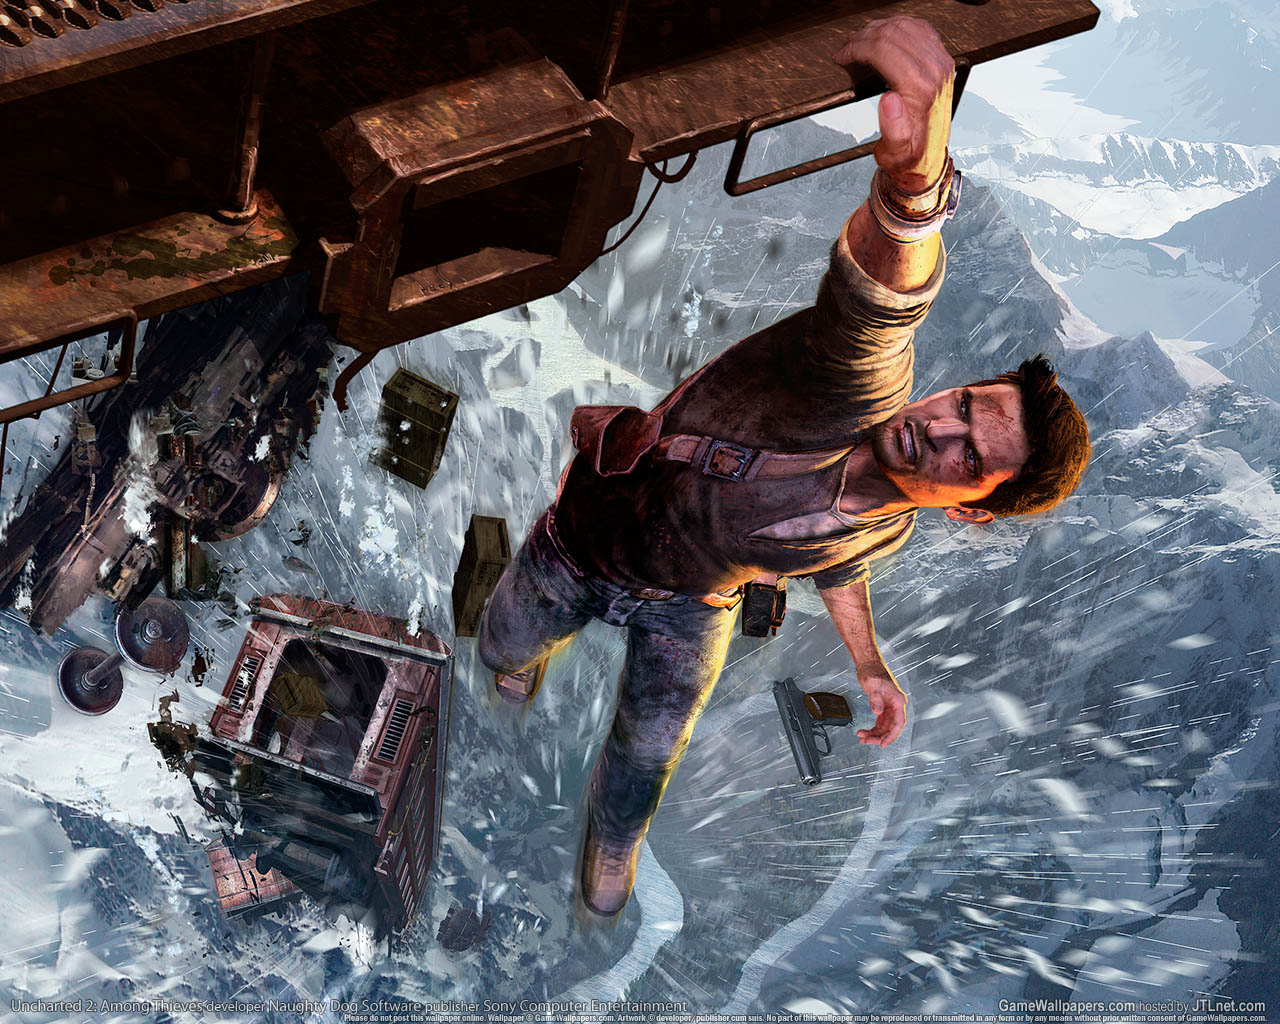 Uncharted 2: Among Thieves fond d'cran 02 1280x1024